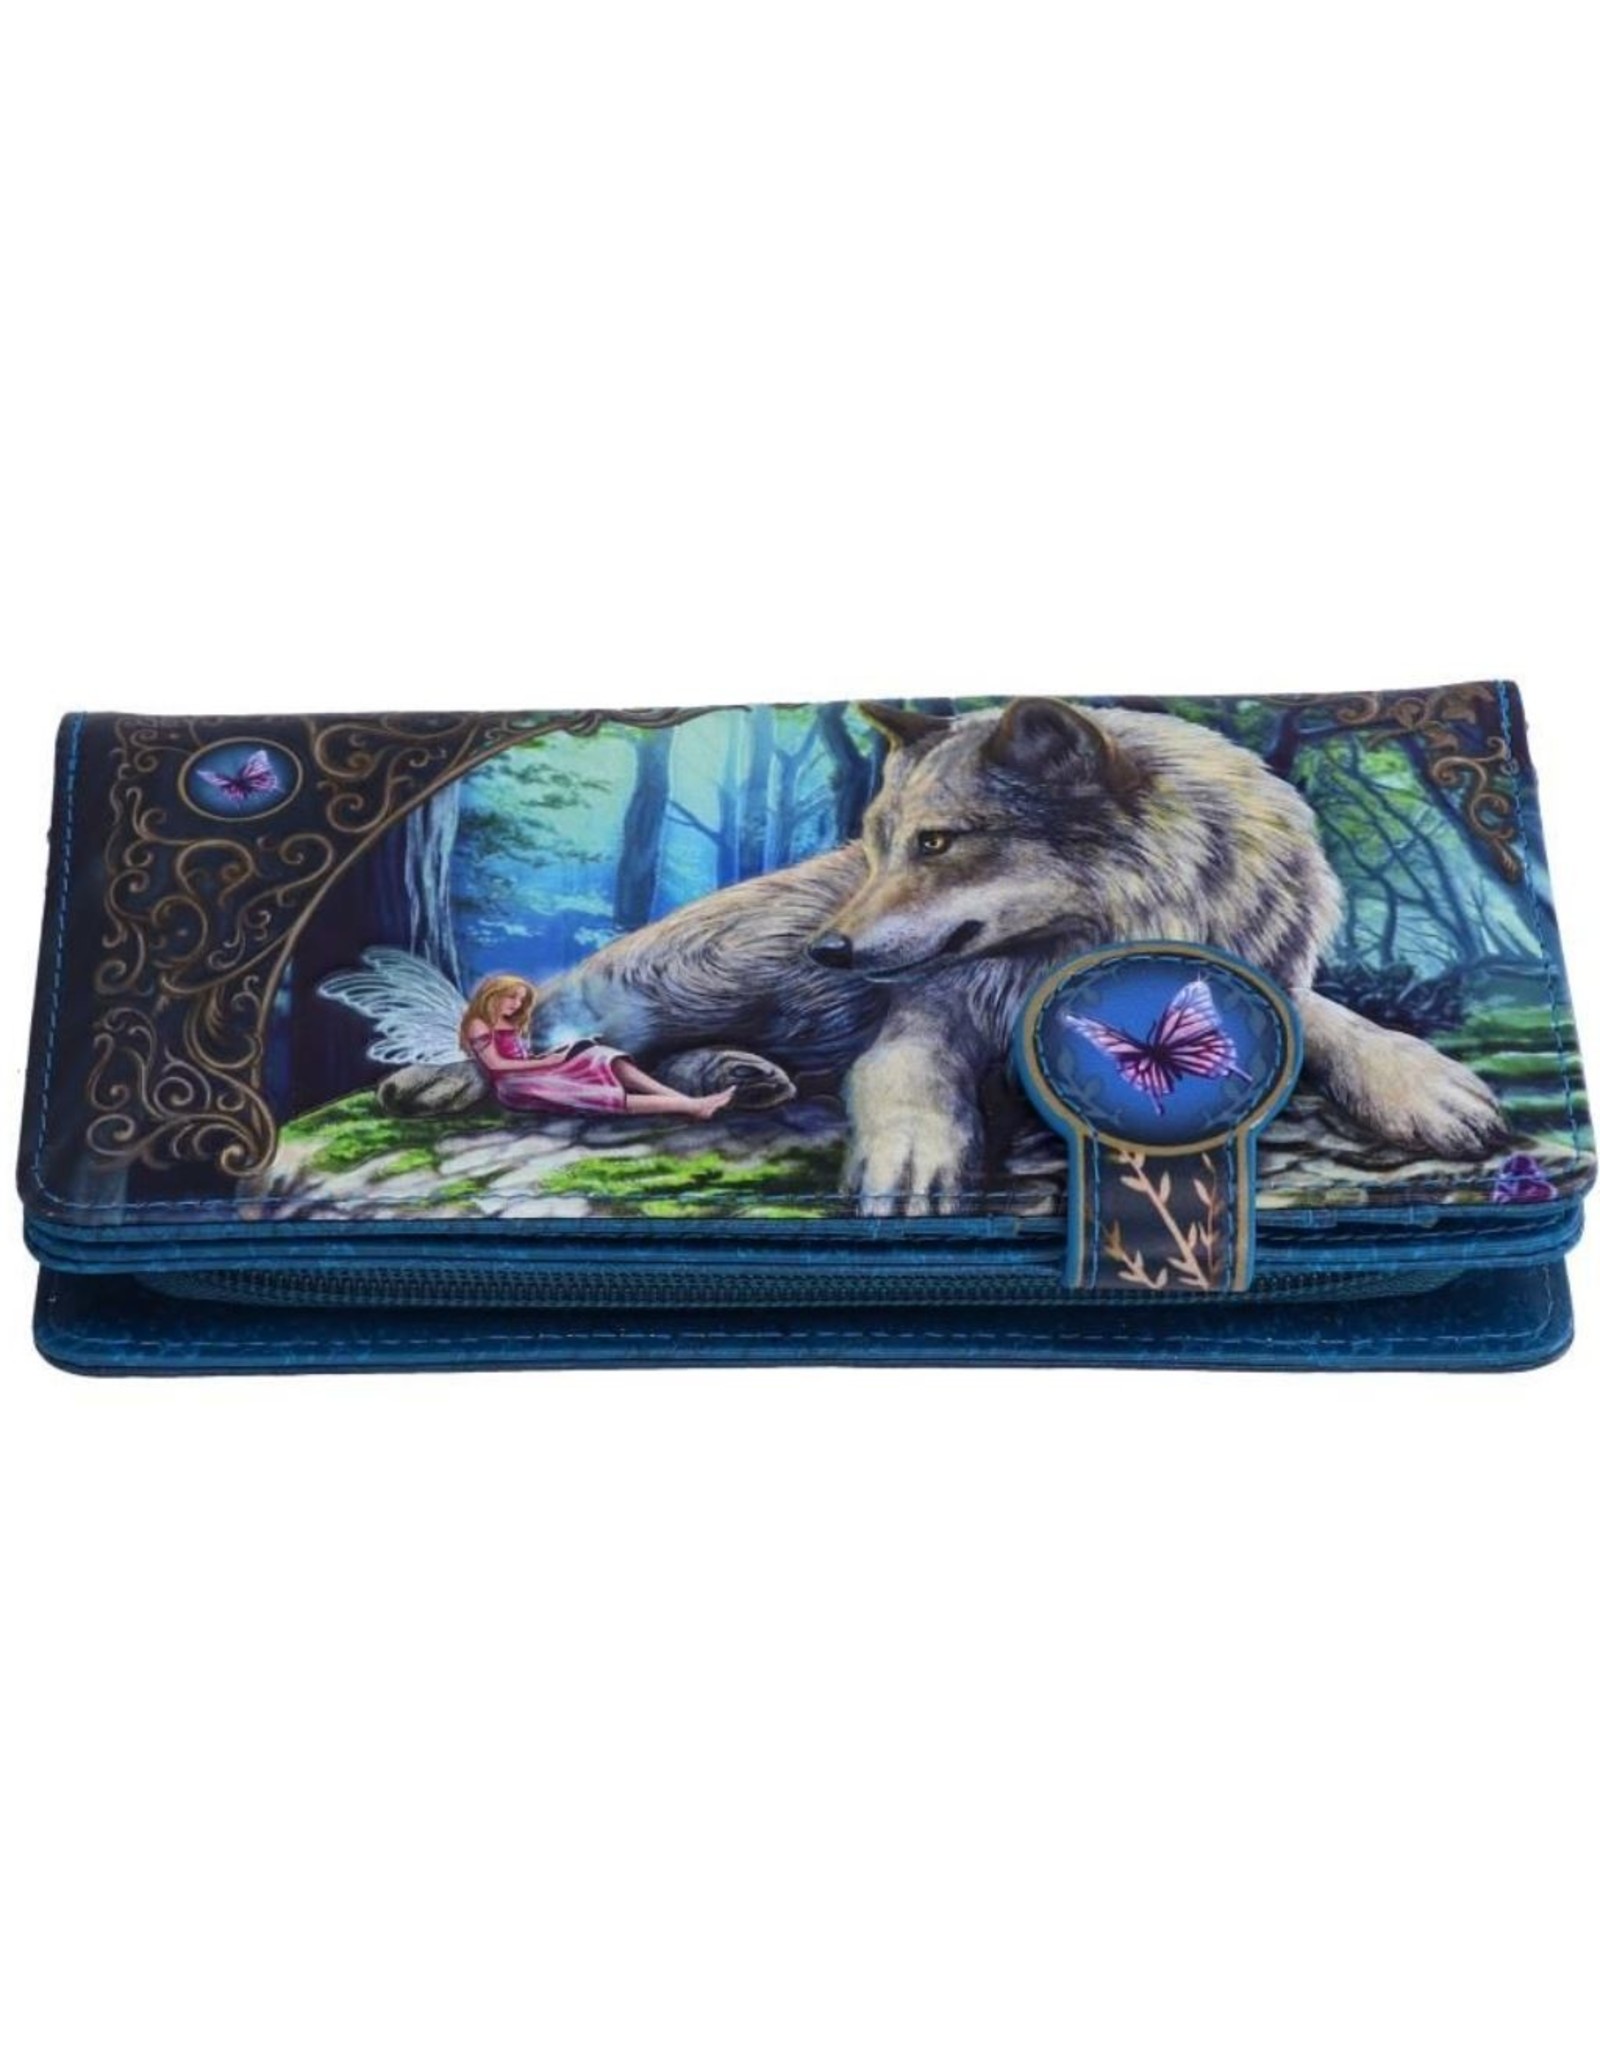 NemesisNow Gothic wallets and purses - Fairy Stories Embossed Purse Lisa Parker